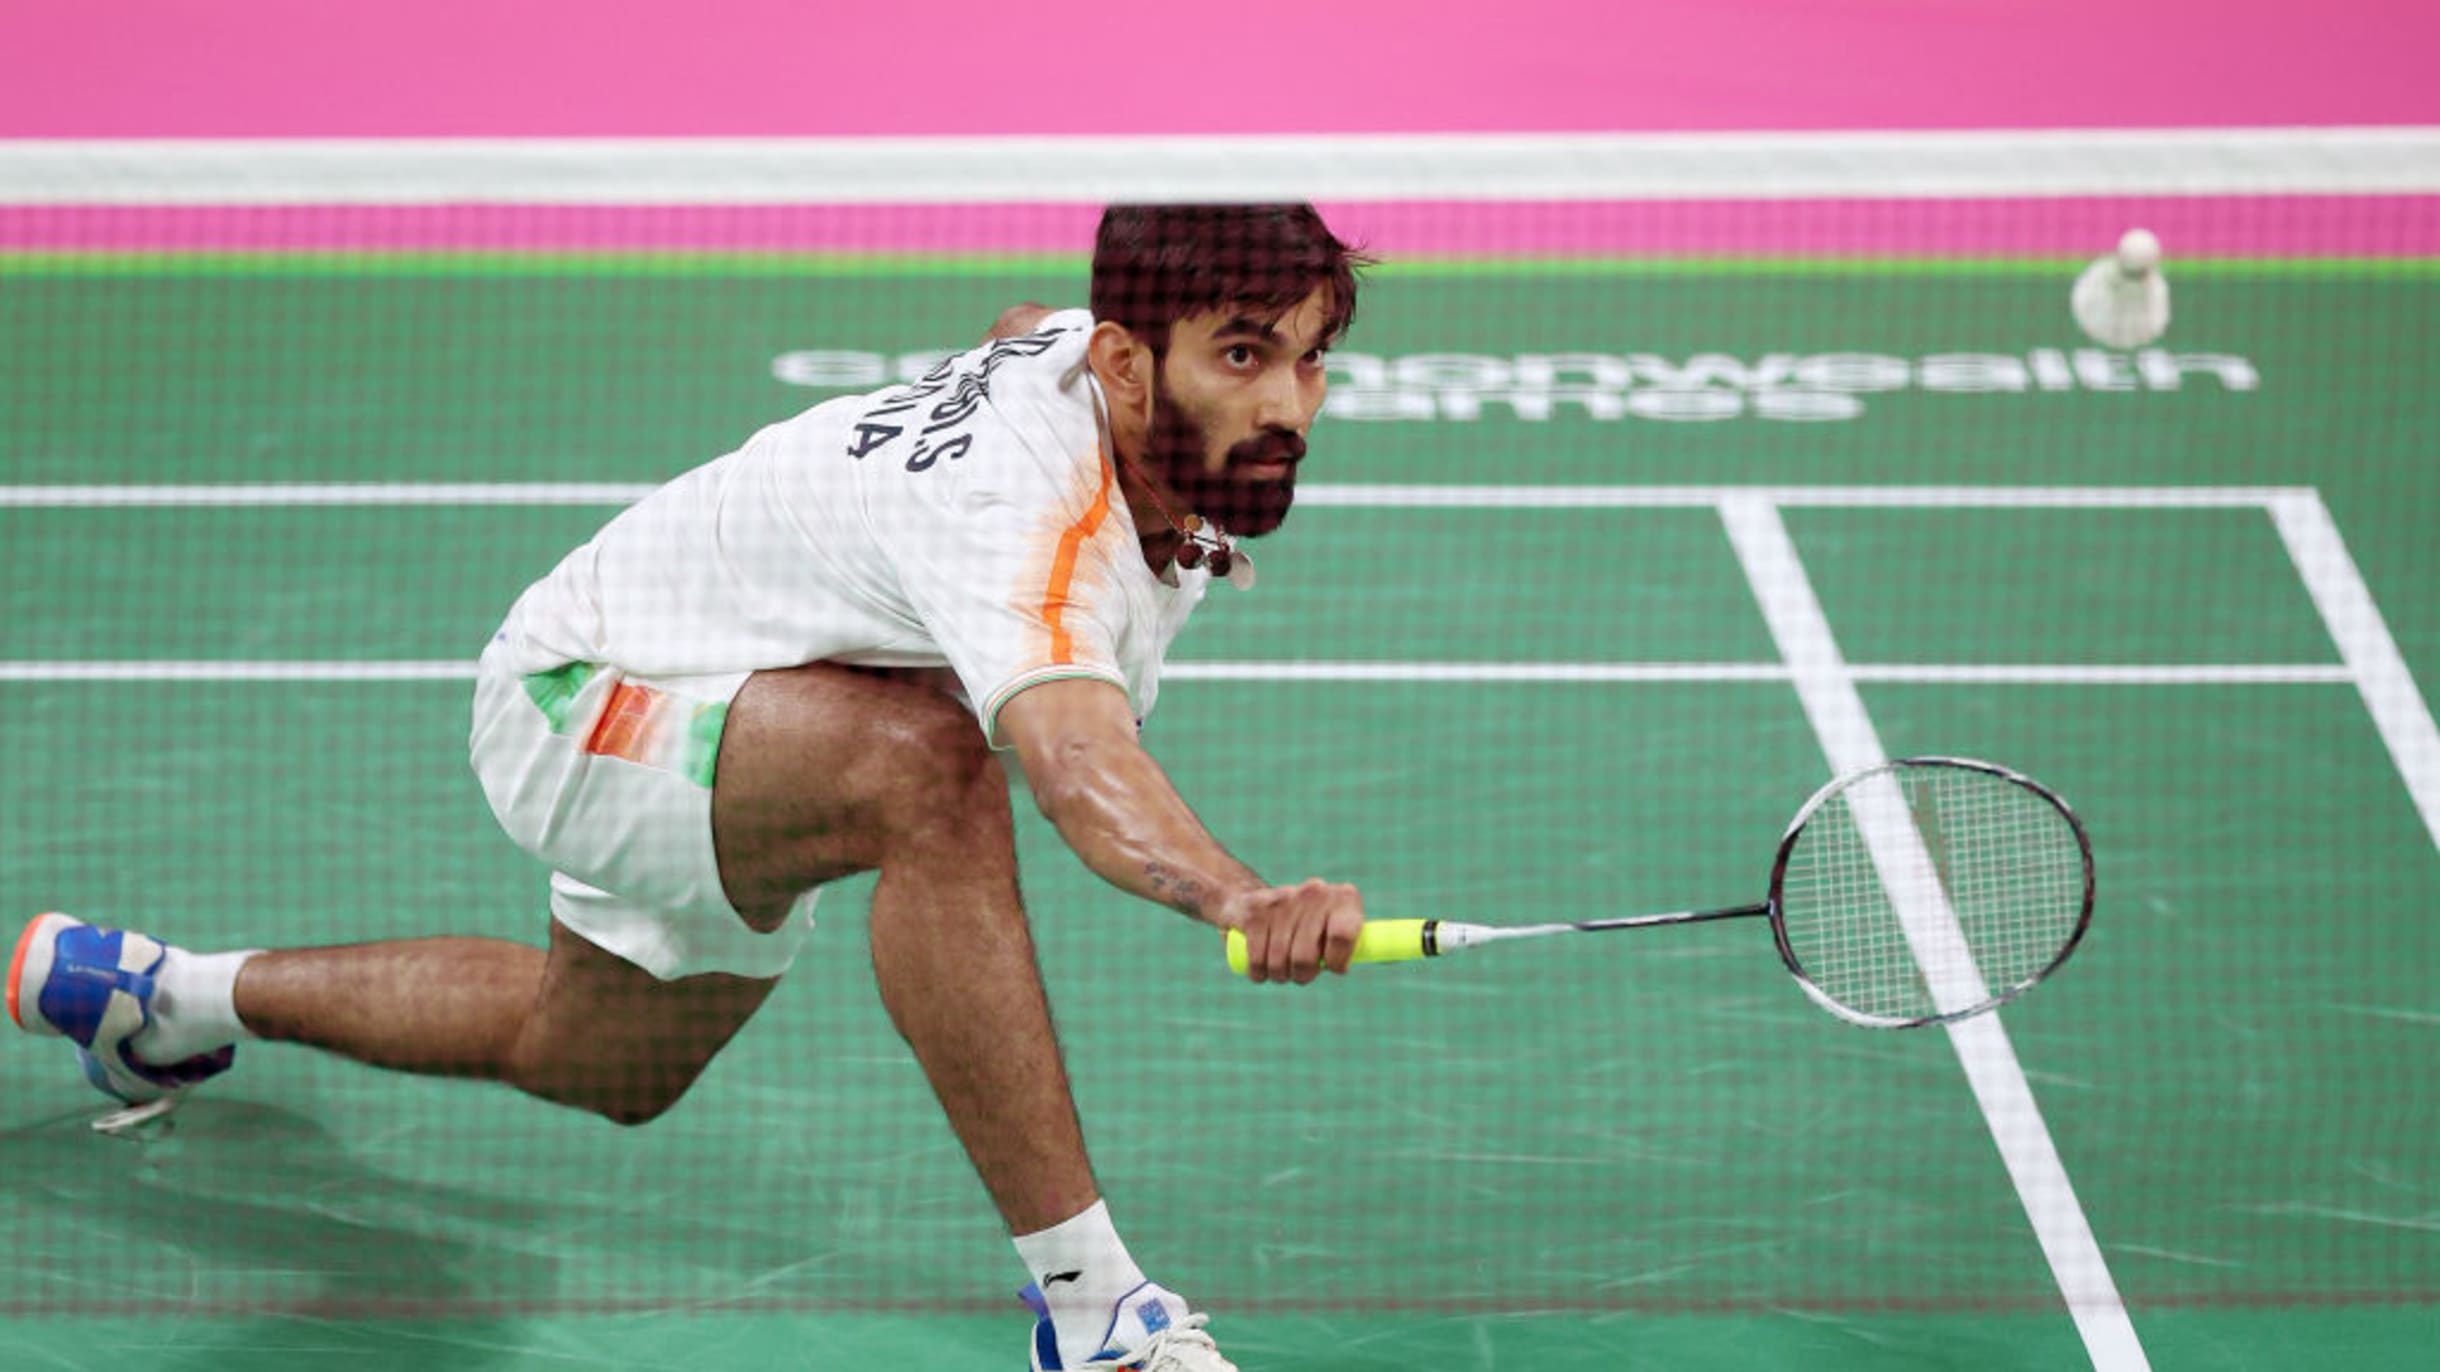 National Badminton Championships 2023 Get schedule and watch live streaming